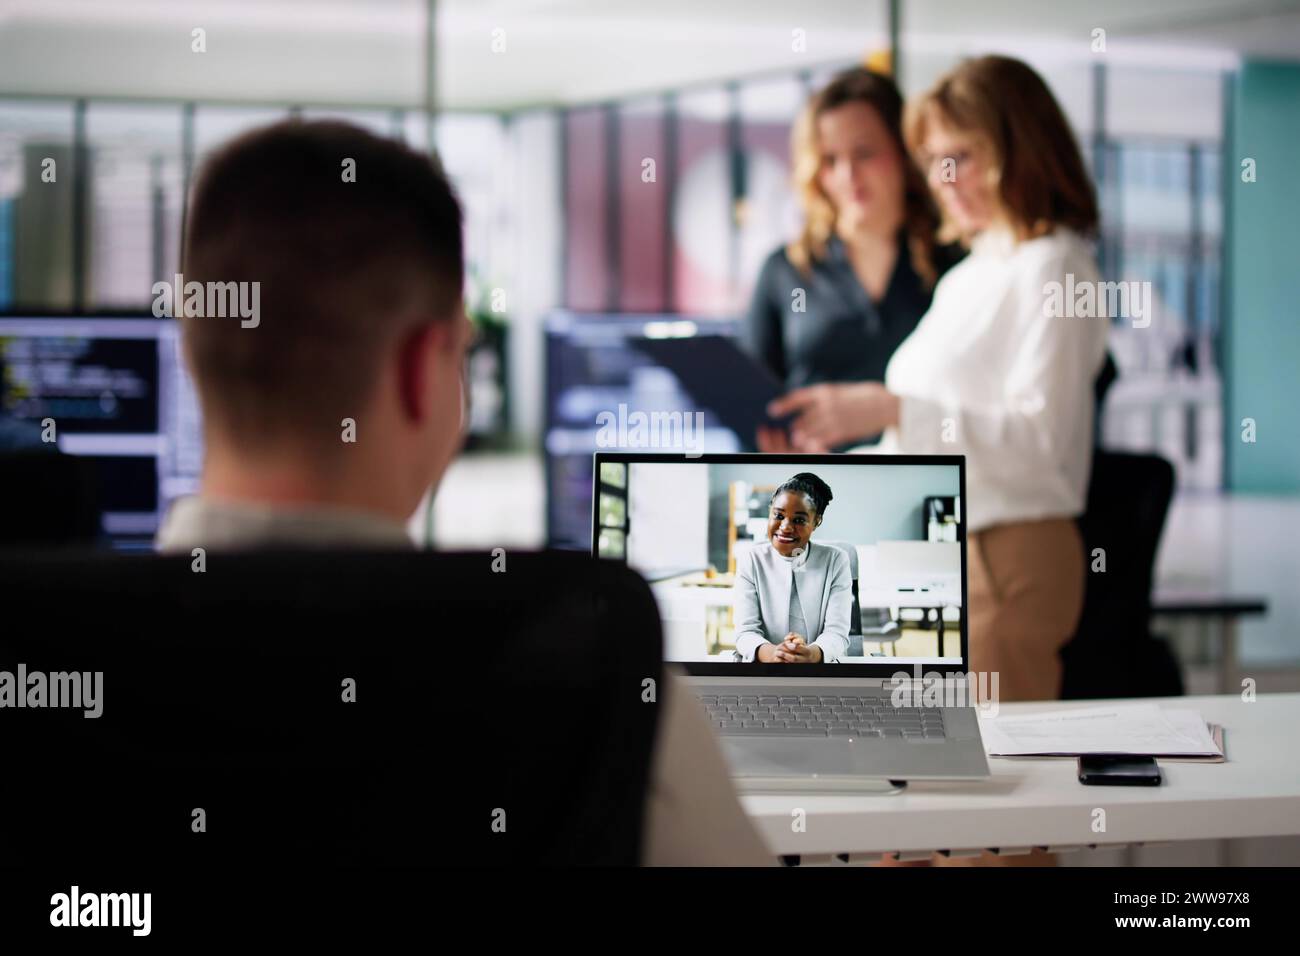 Business Video Conference Call In Meeting Room Stock Photo